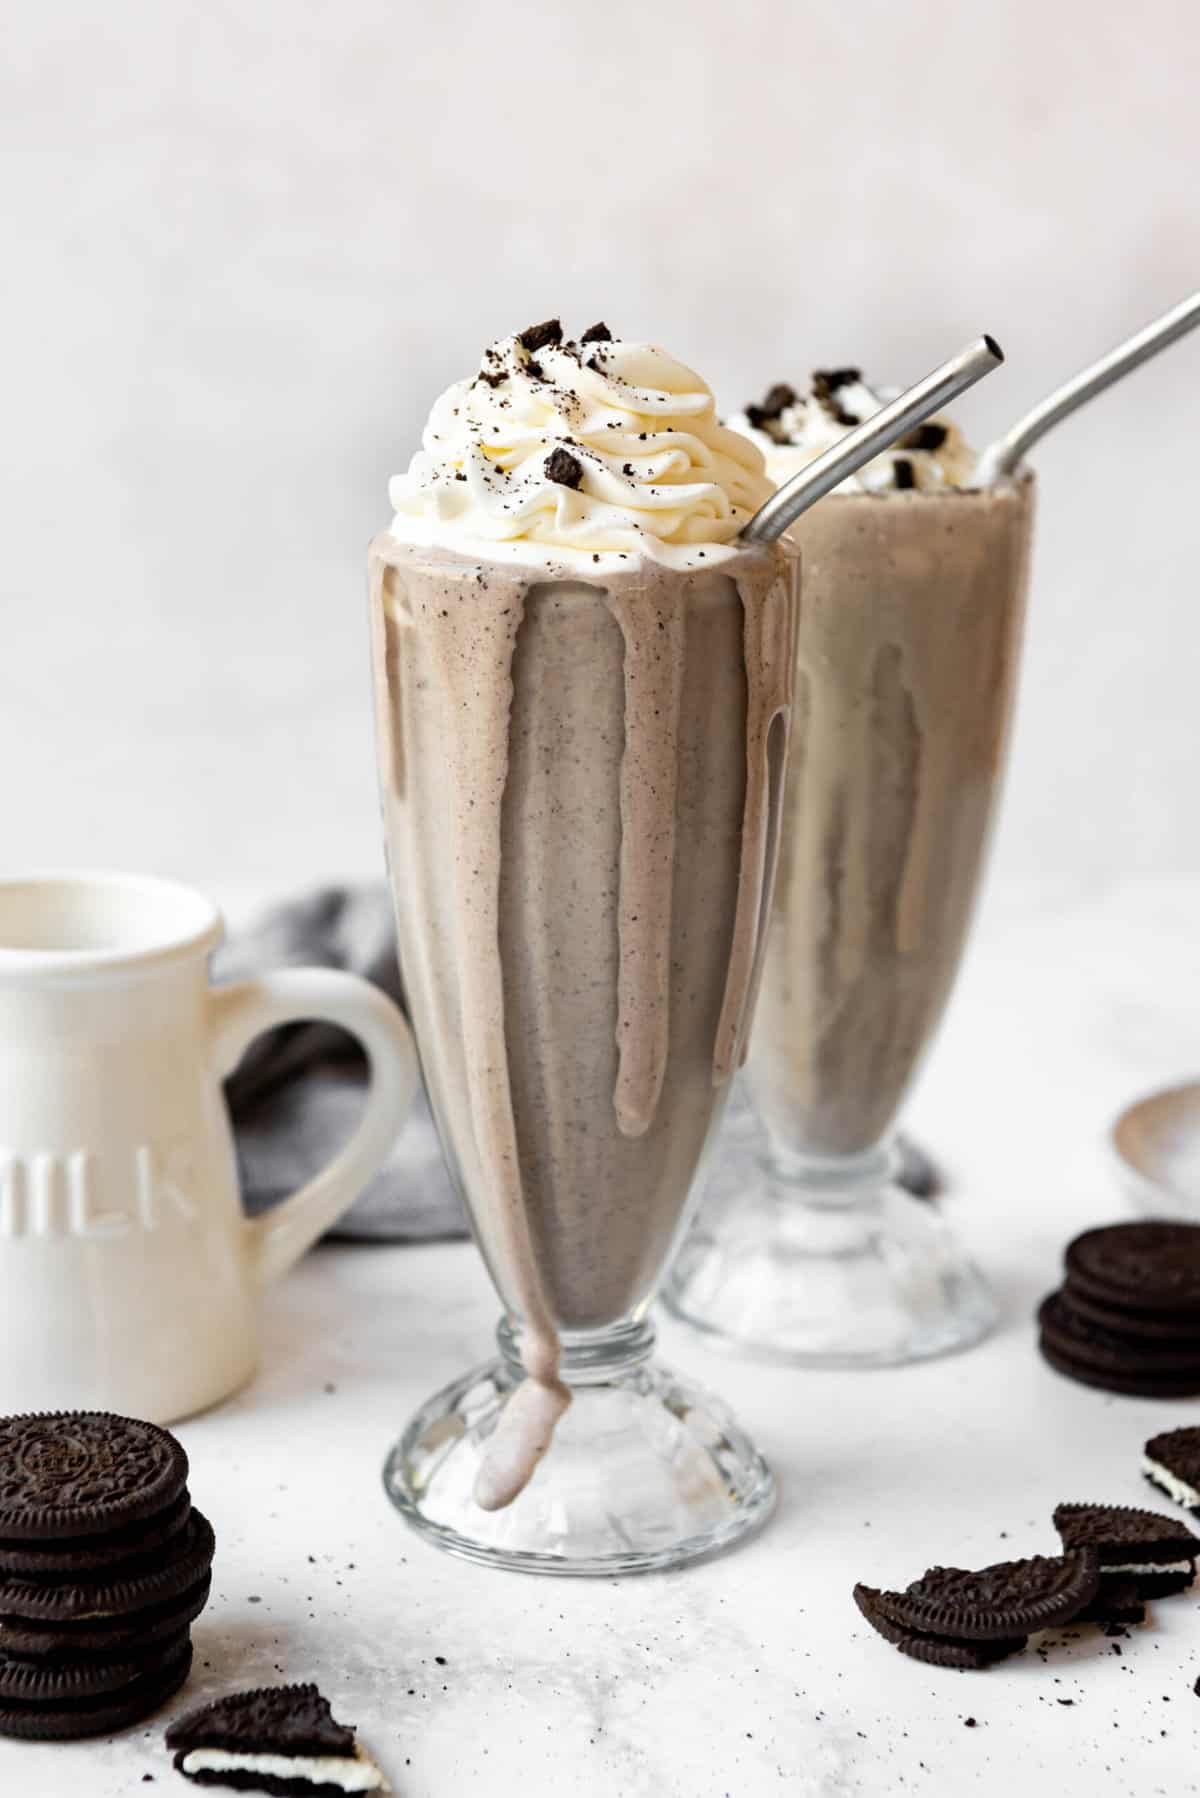 An Oreo milkshake in a tall glass with whipped cream on top and some milkshake dripping down the side of the glass.